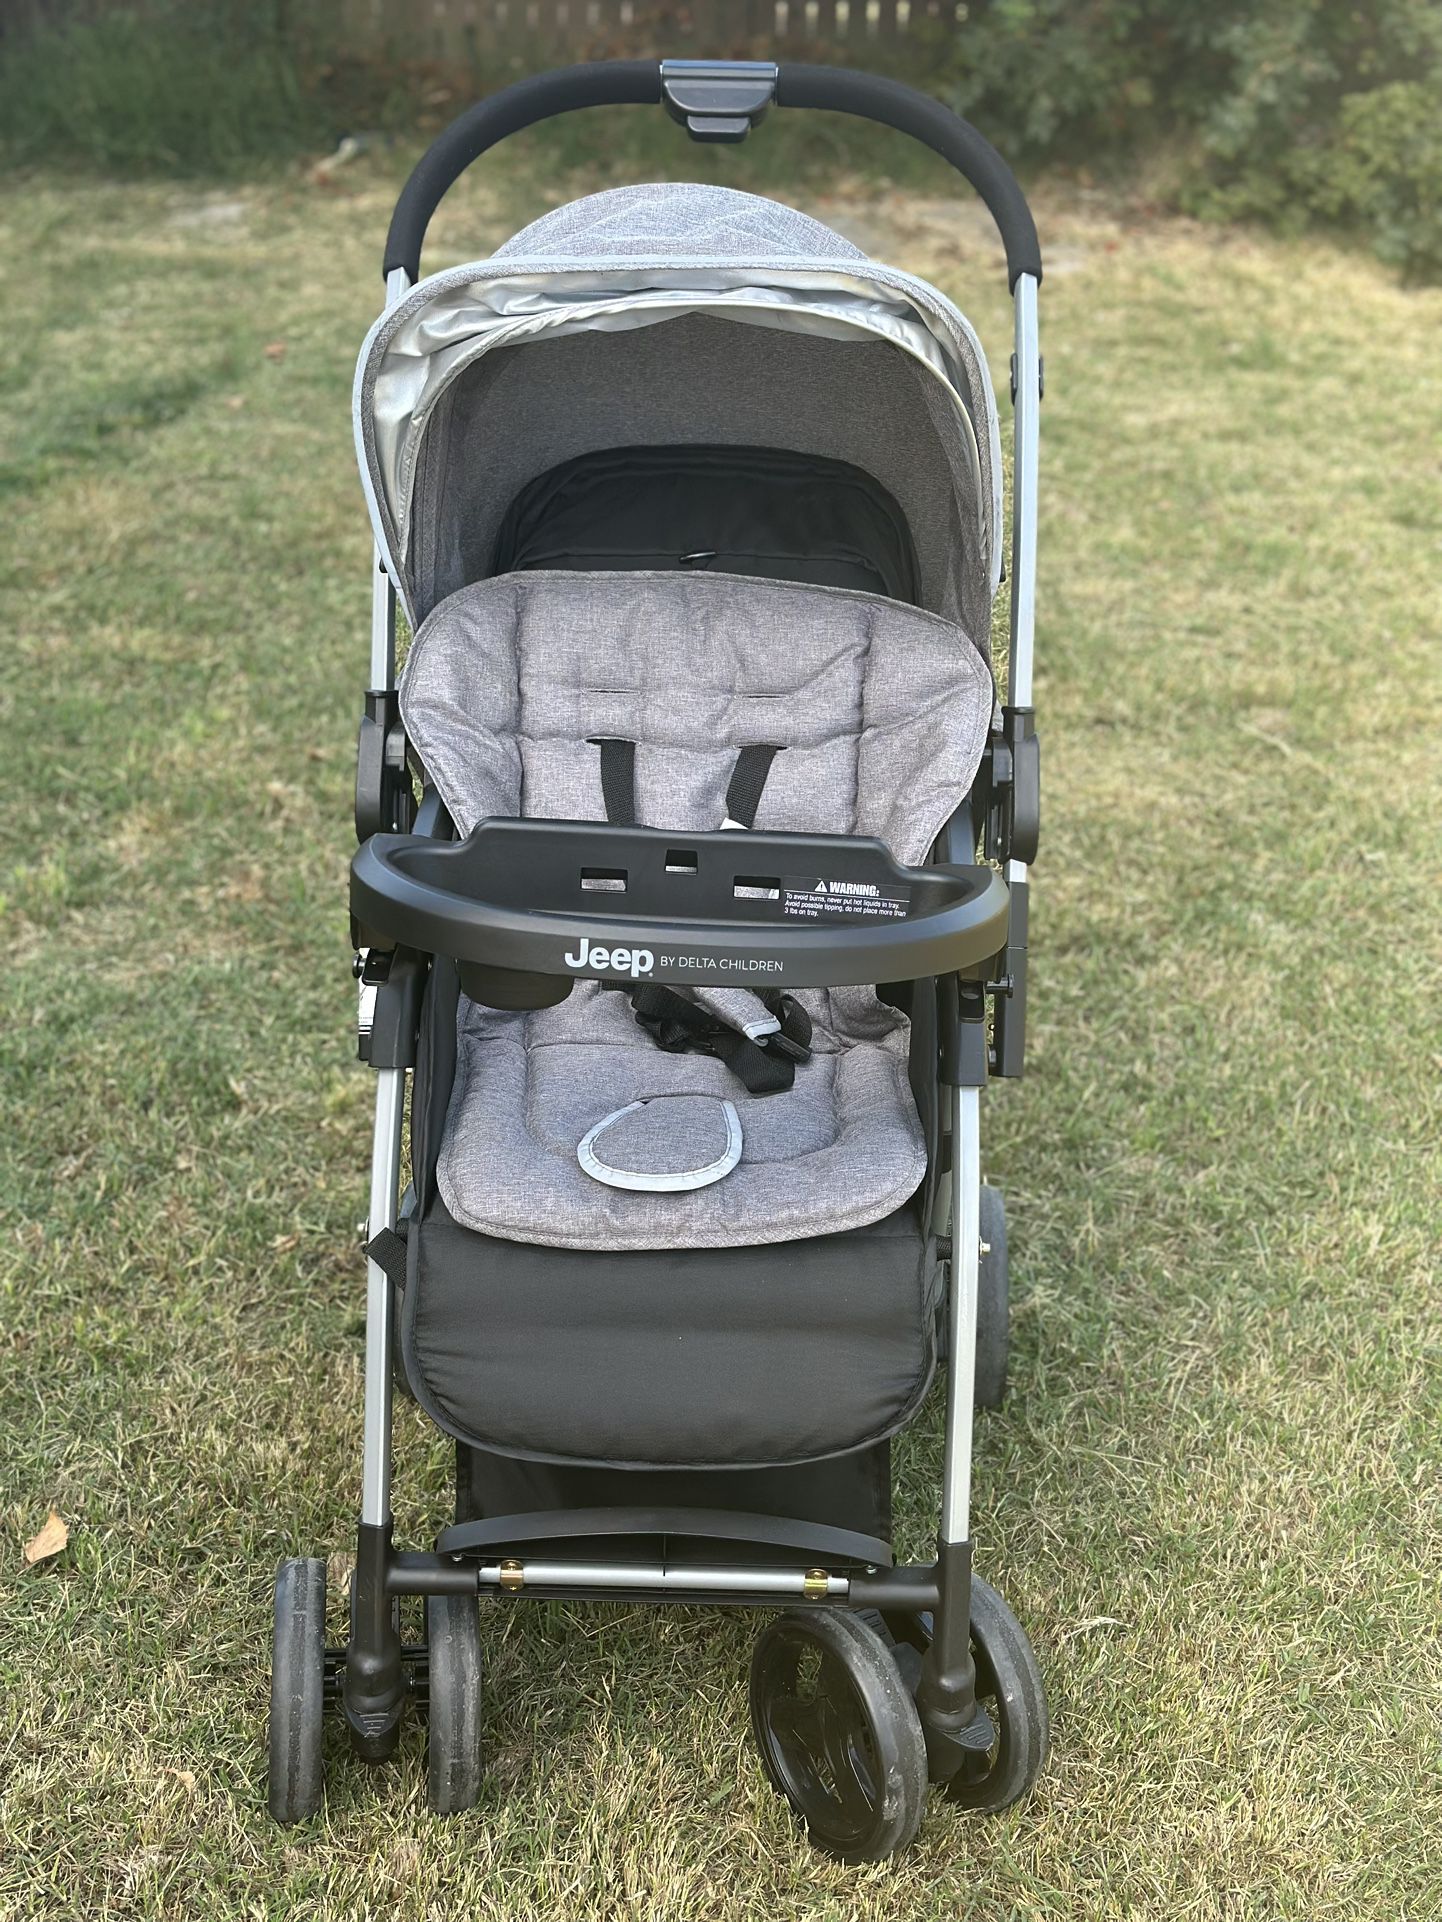 Barely used Stroller 